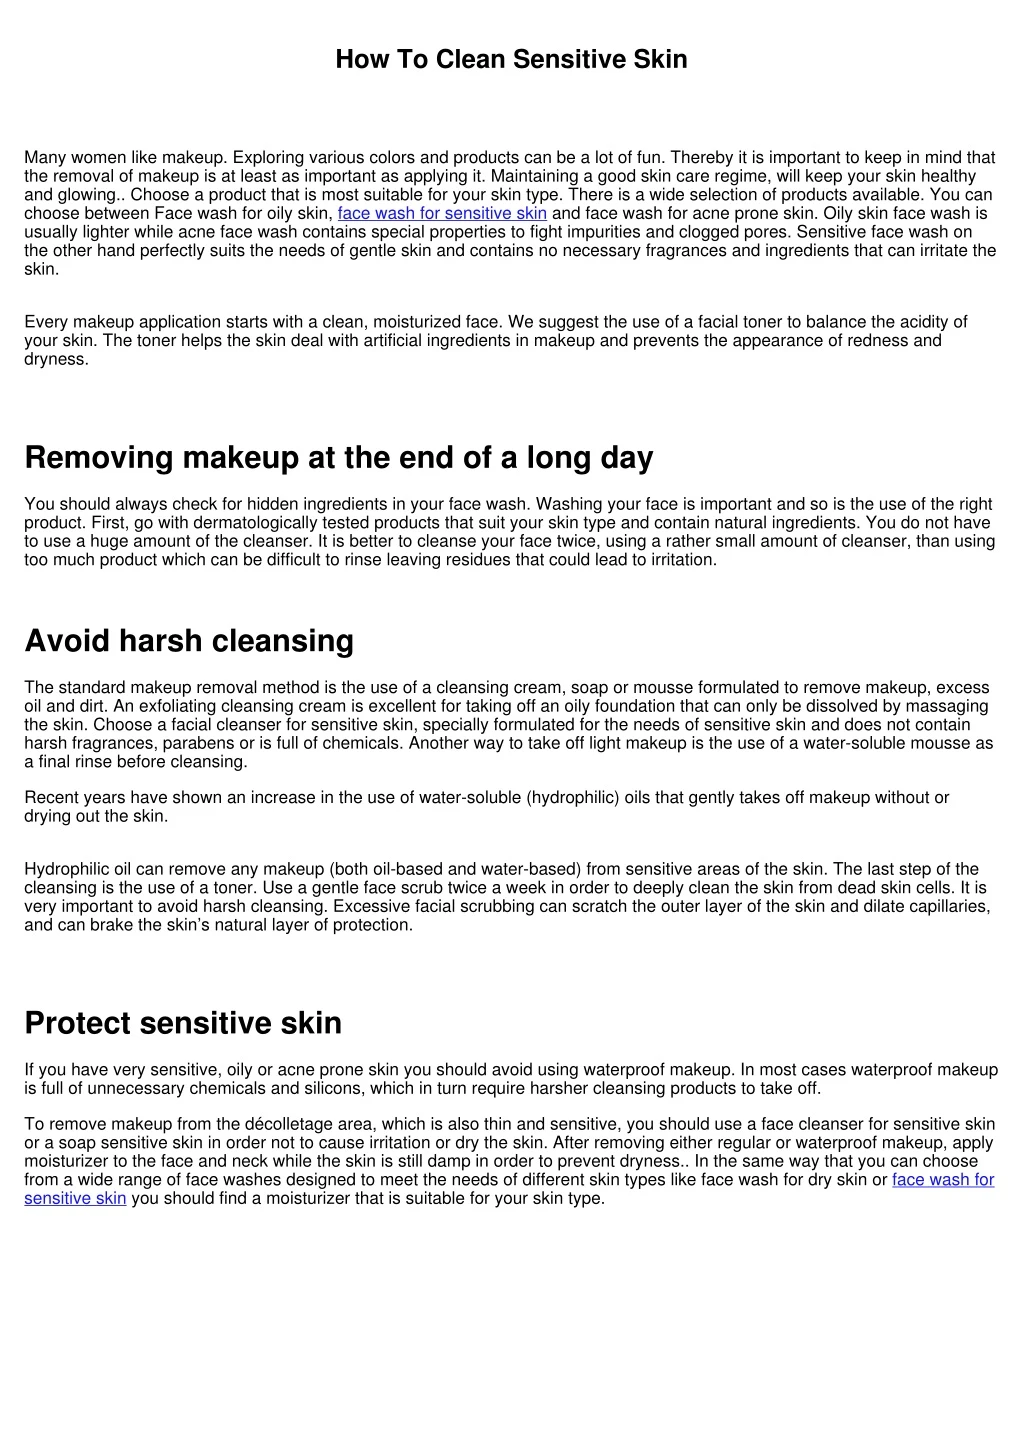 how to clean sensitive skin